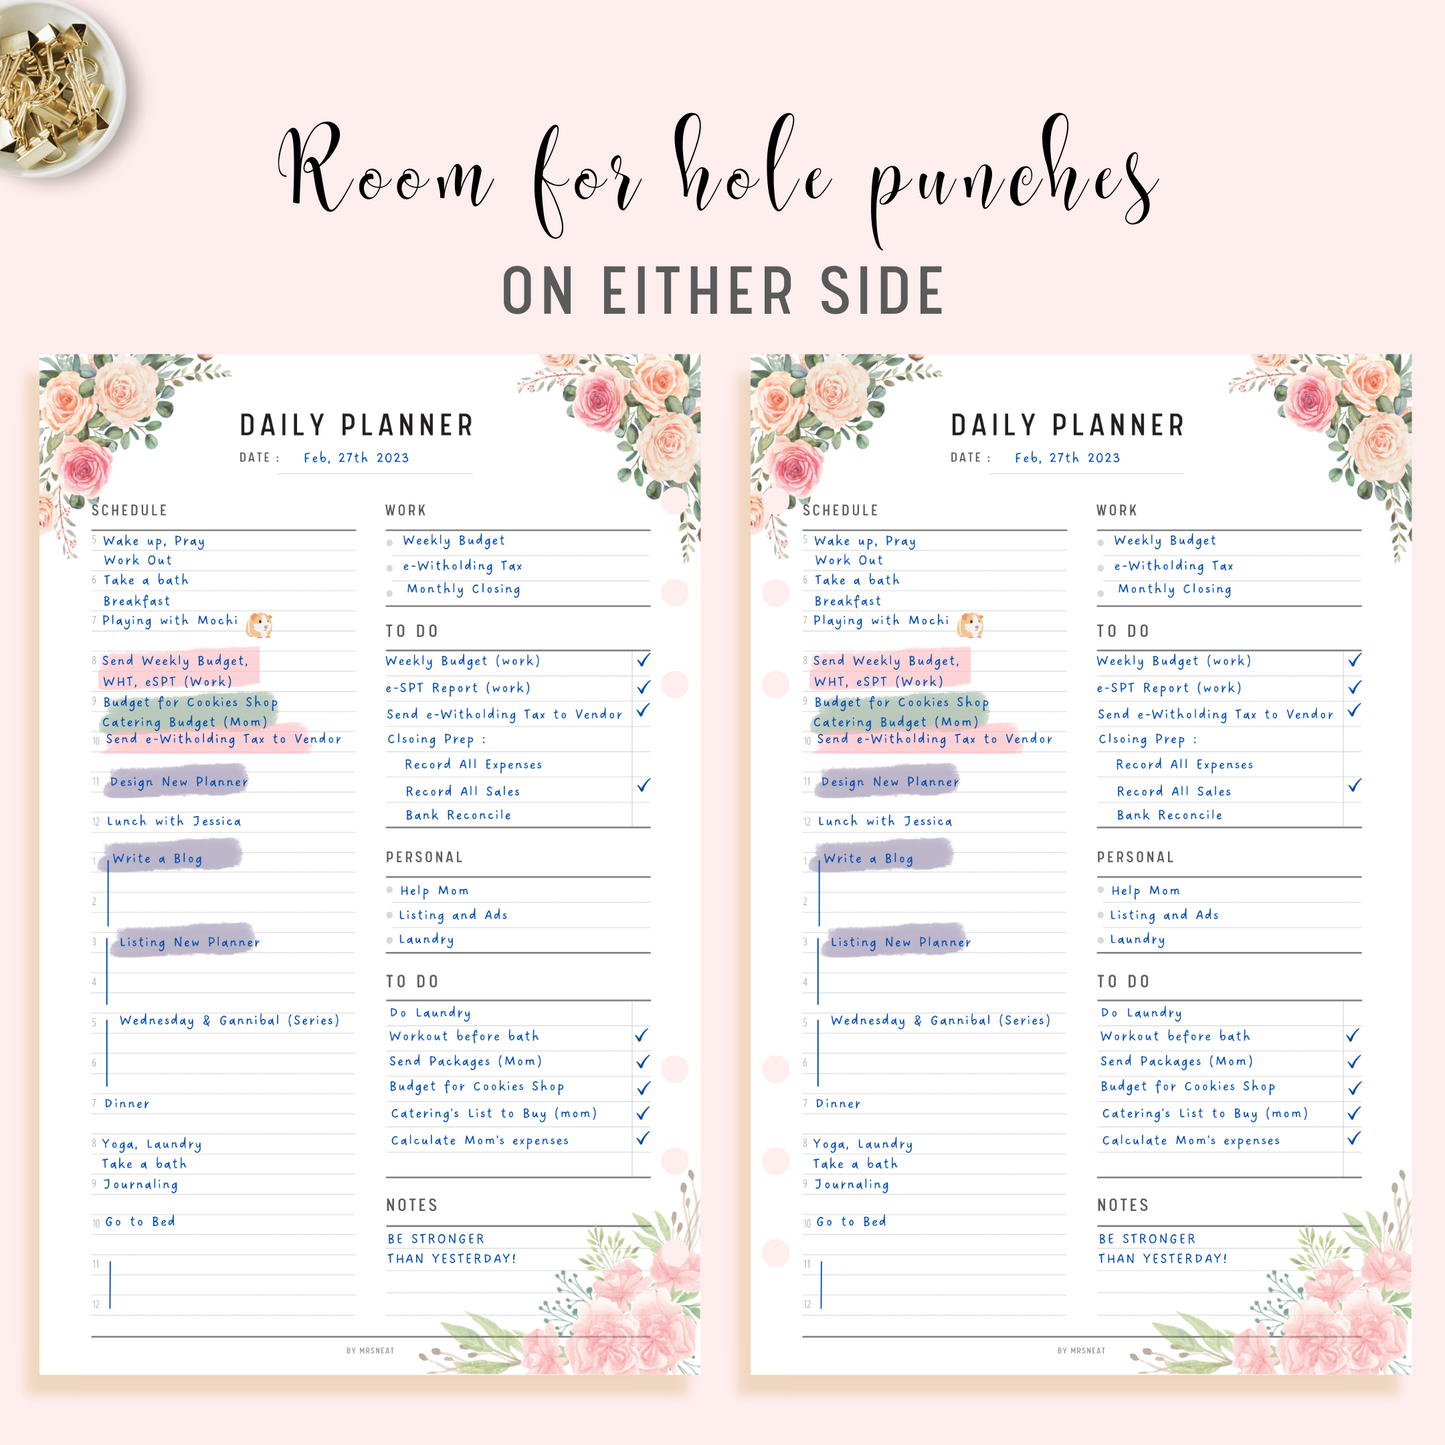 Floral Work from Home Planner Printable with room for hole punches on either side